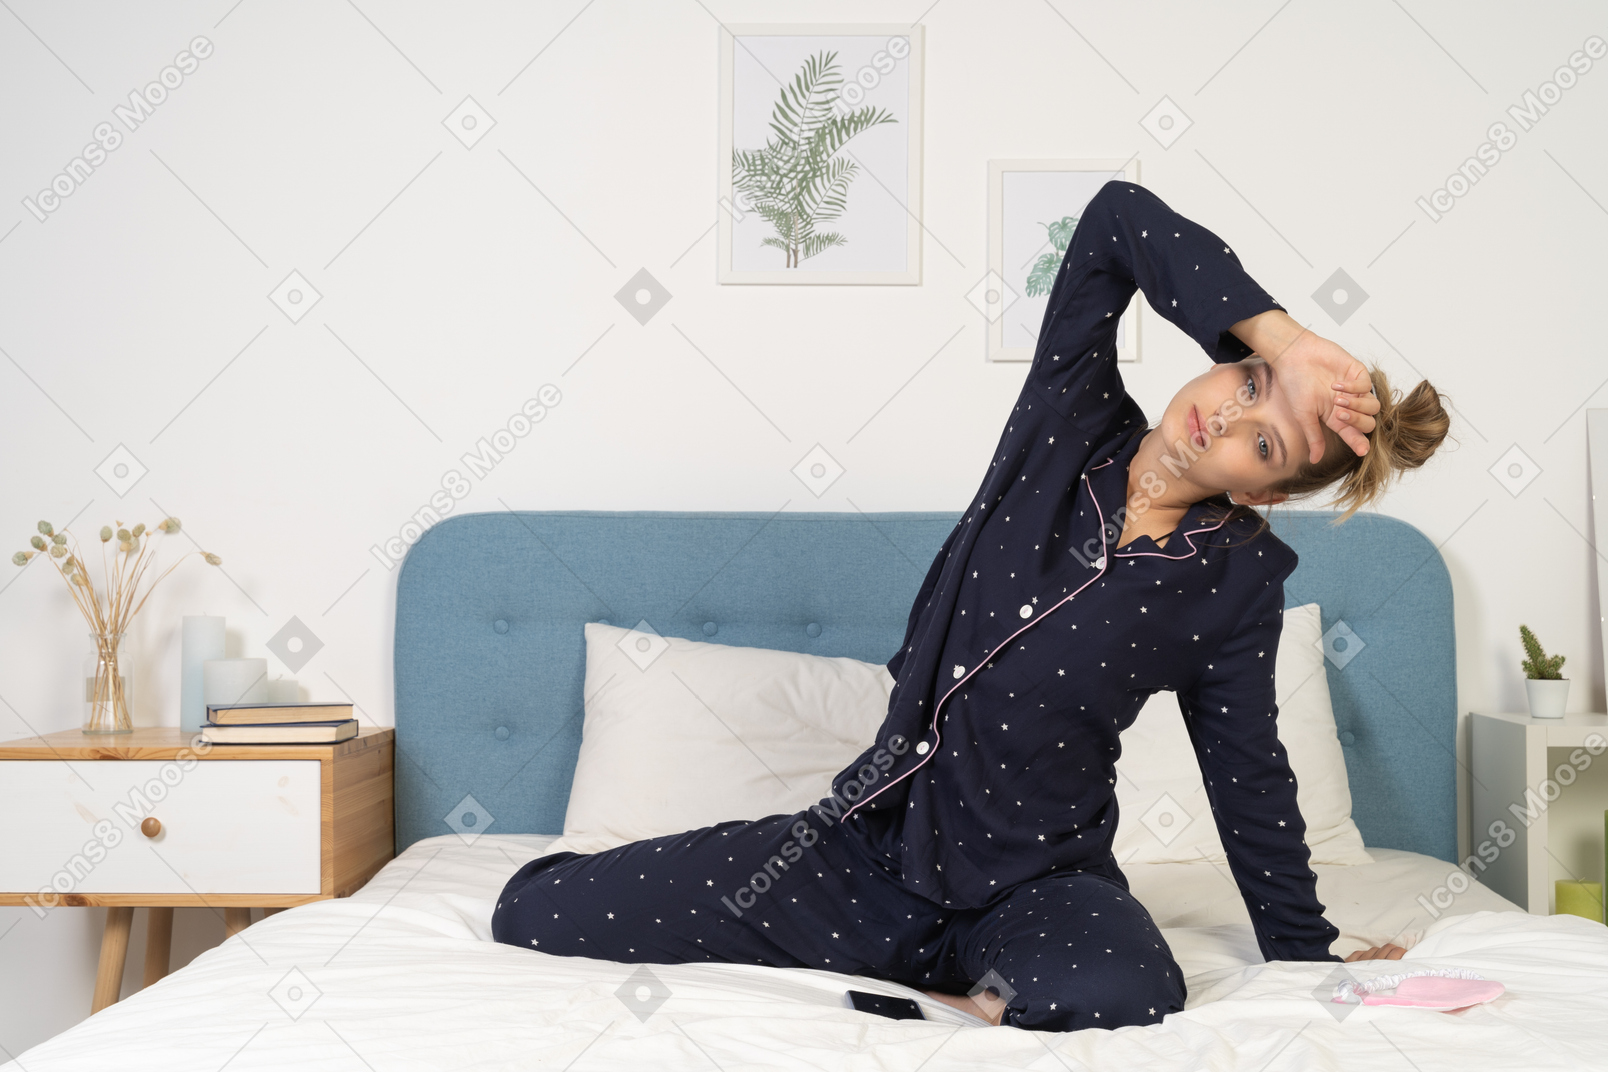 Front view of a bored young lady in pajamas staying in bed